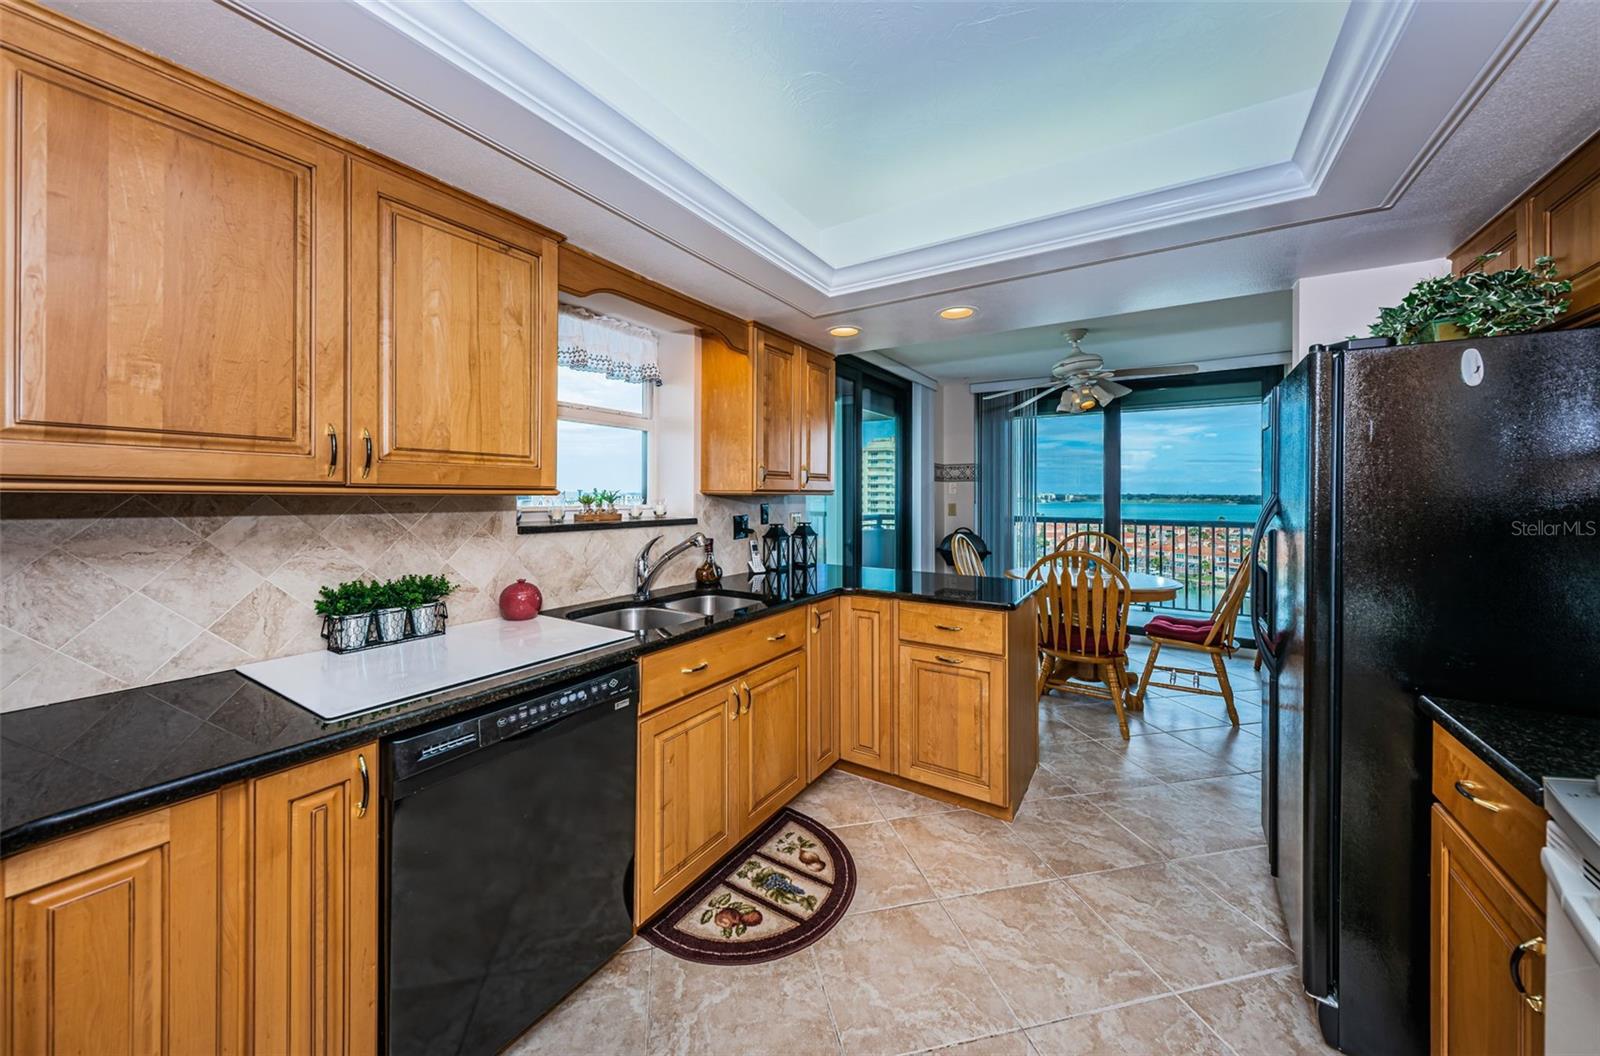 Take in the Gulf & Intracoastal views while in the Kitchen & Dining area